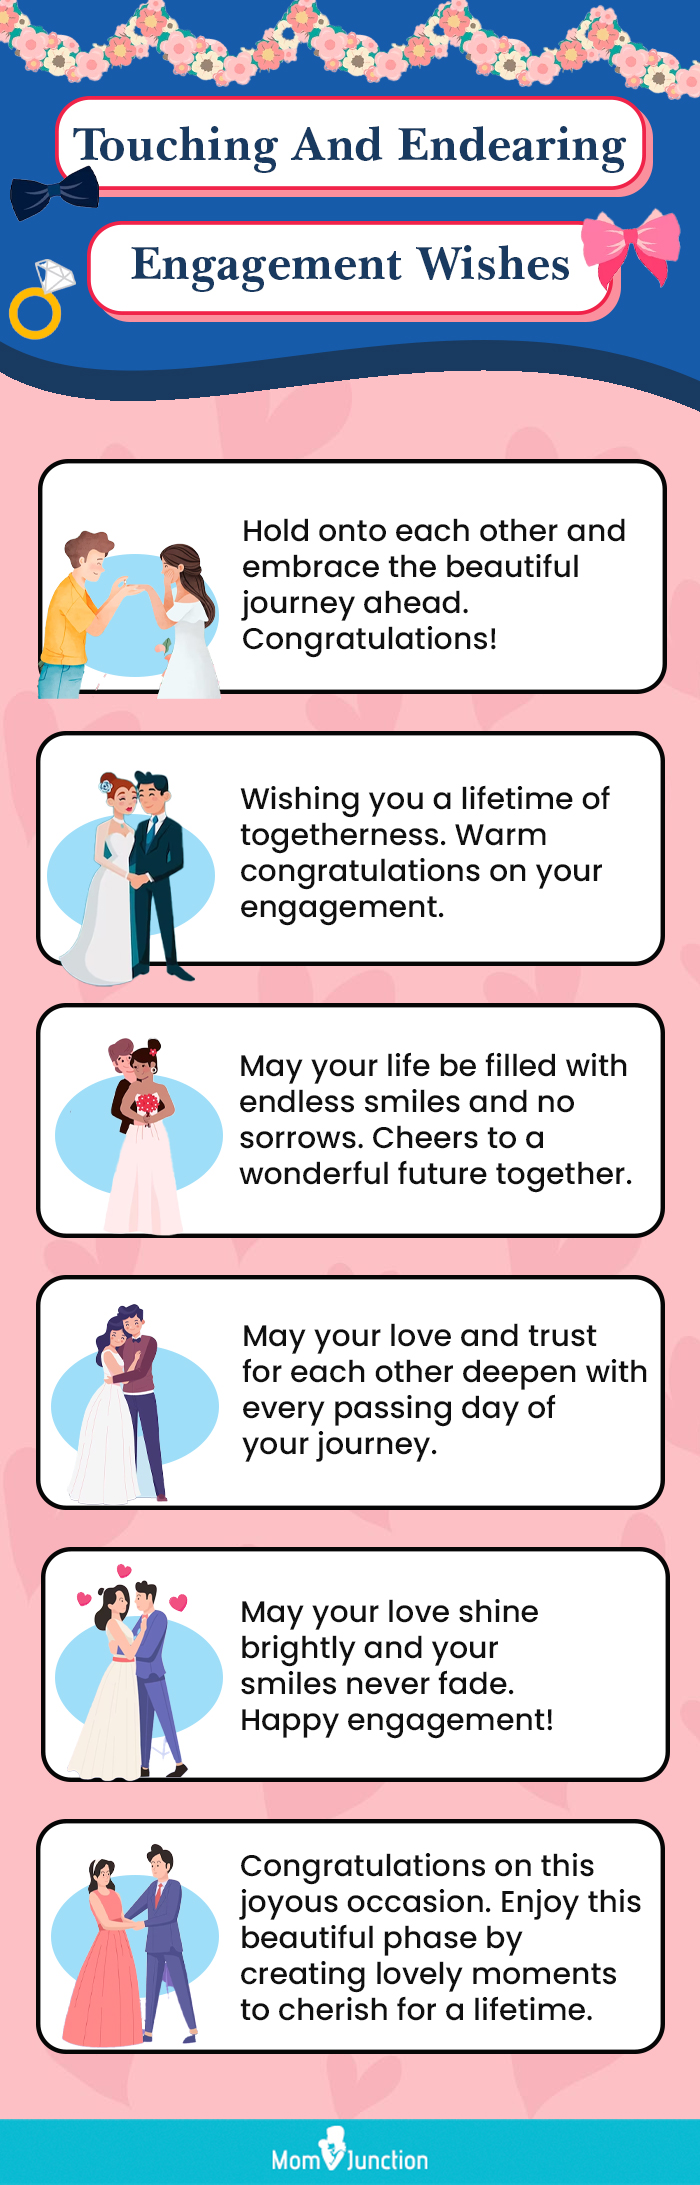 Touching And Endearing Engagement Wishes